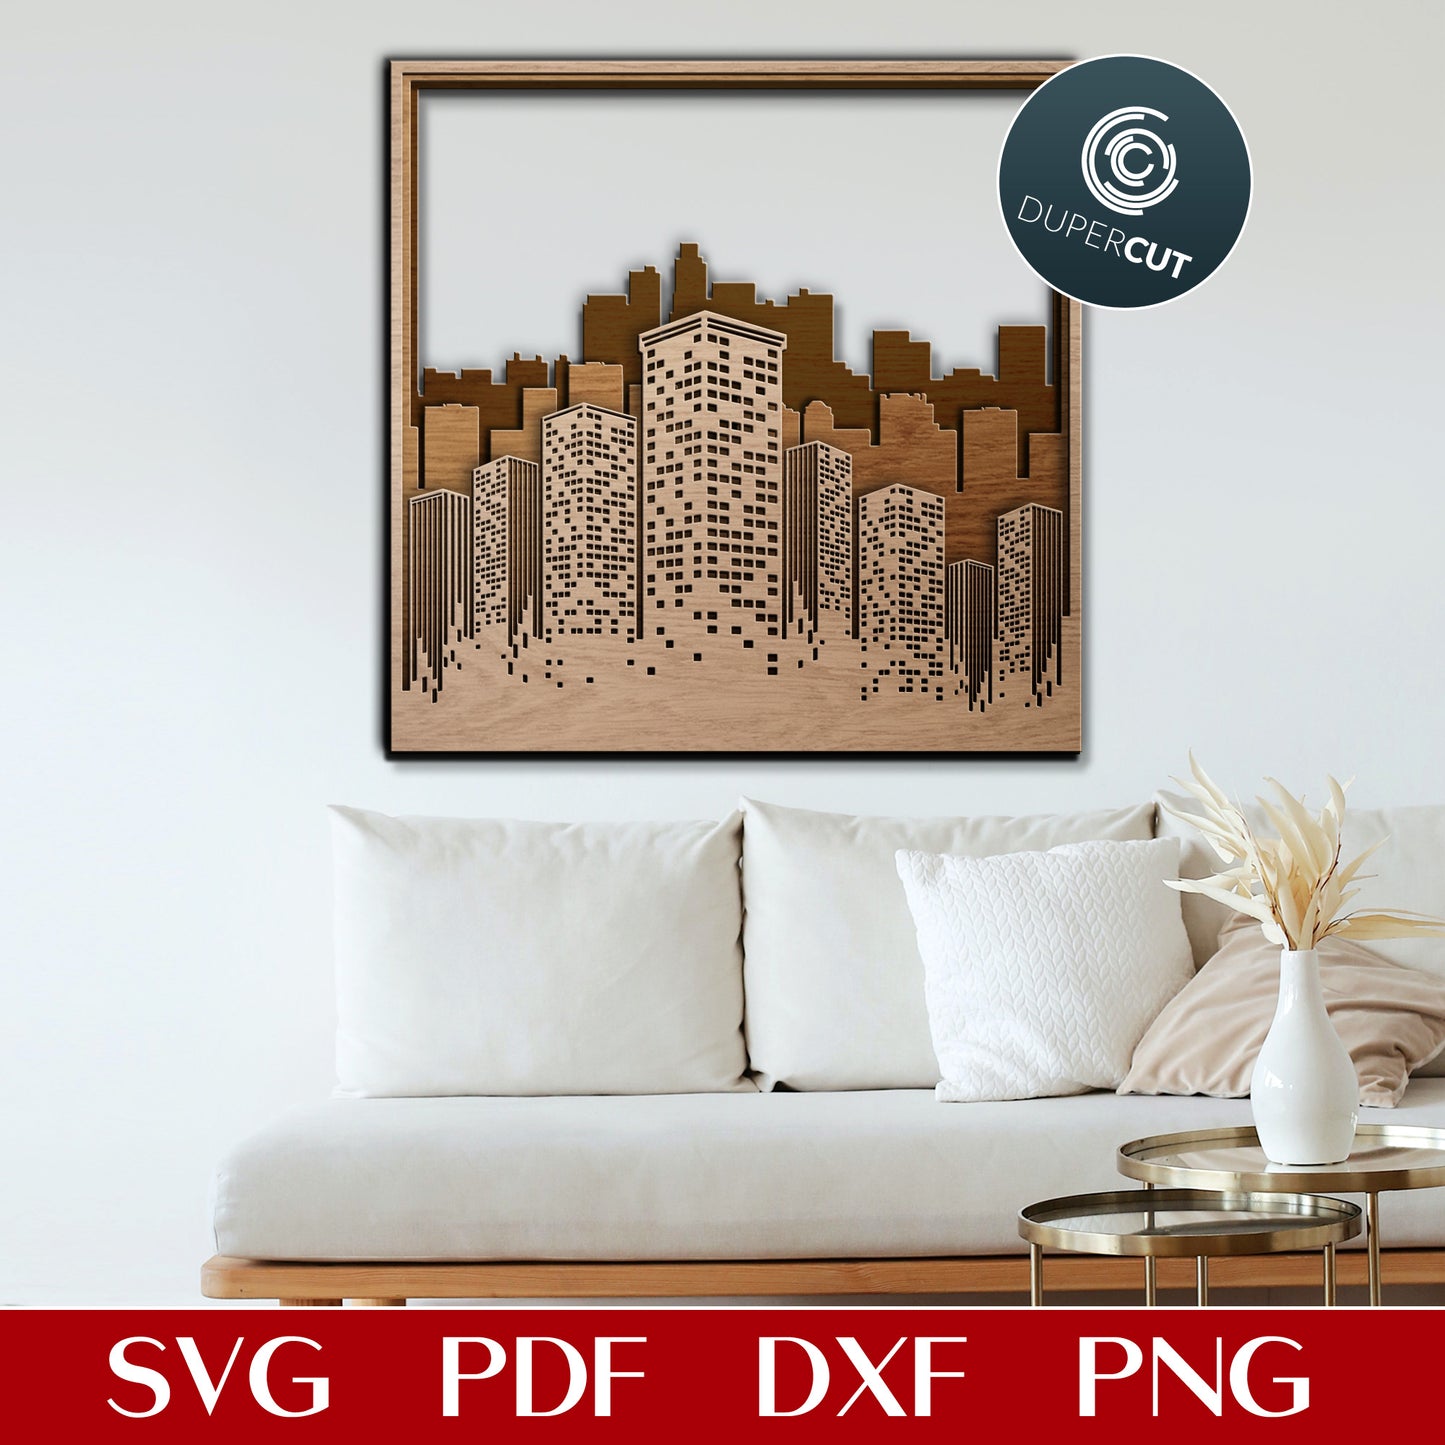 City skyline DIY office decoration - layered cutting files - SVG PDF DXF vector template for Glowforge, Cricut, Silhouette Cameo, CNC plasma laser machines by DuperCut